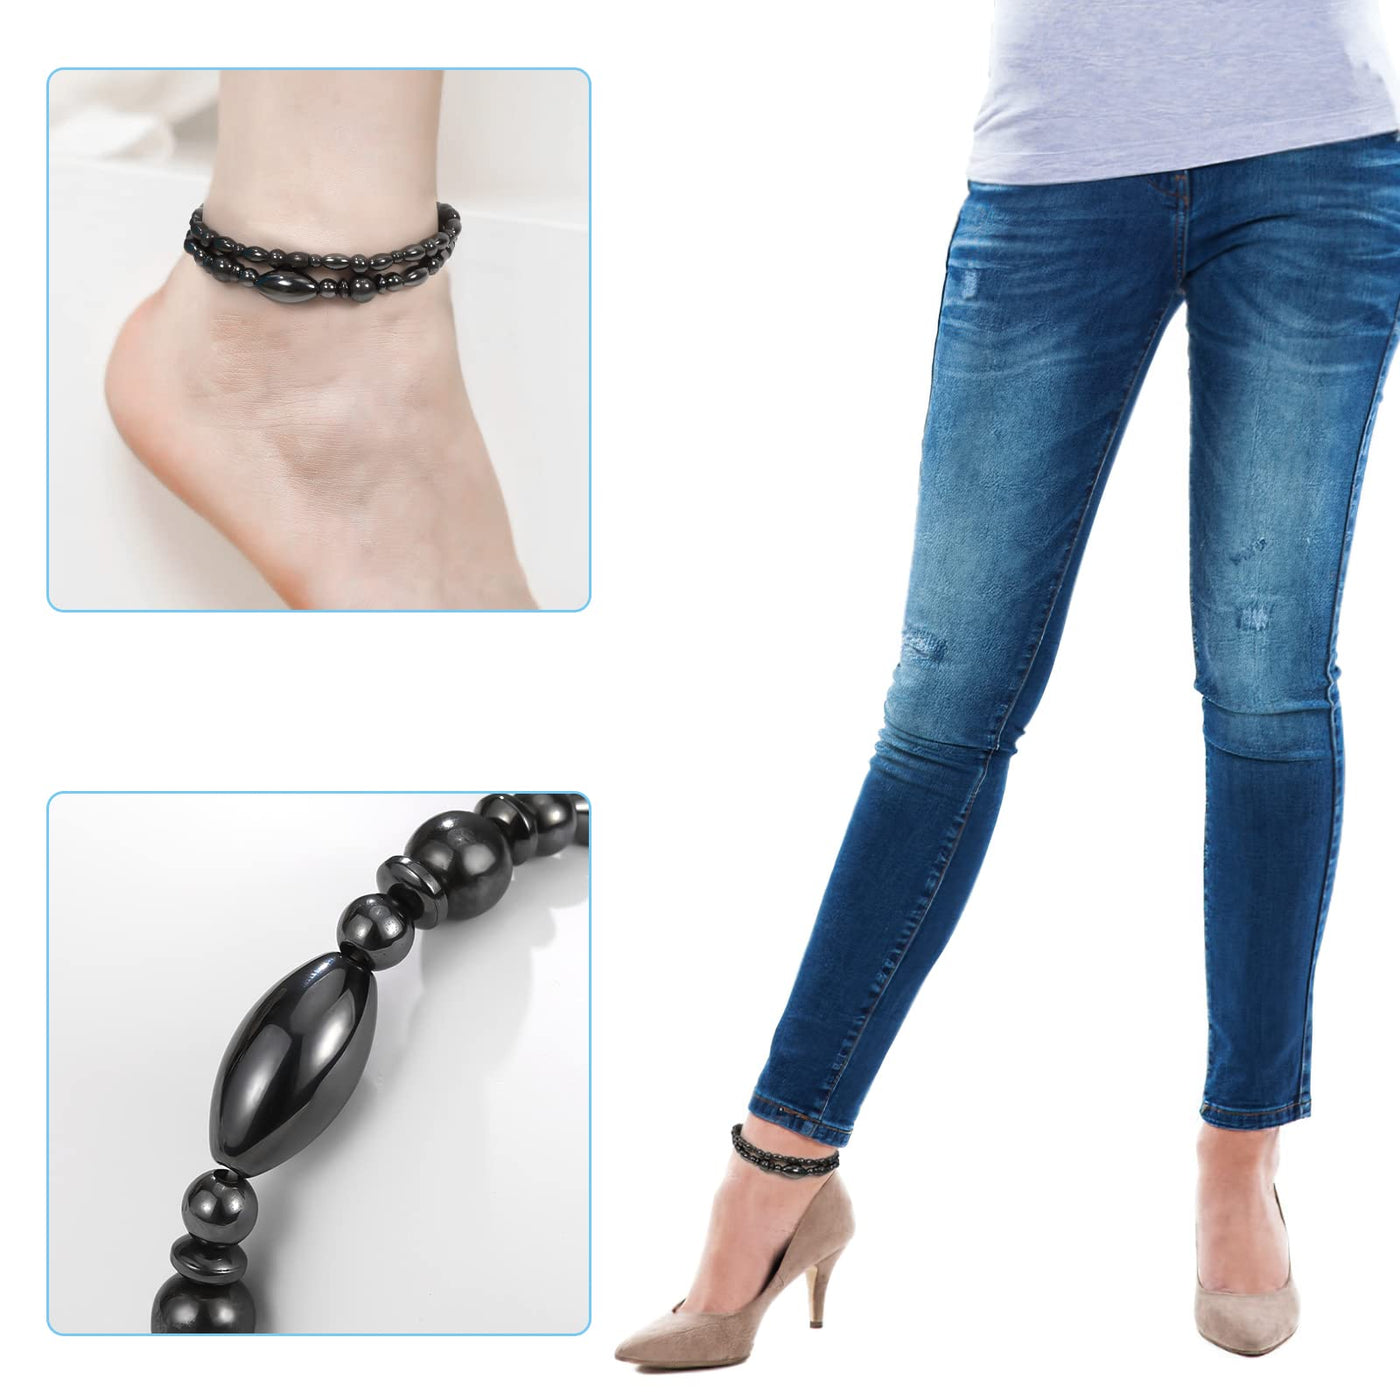 RainSo Magnetic Magnetic Therapy Anklet For Women Bio Energy 4 Elements,  Elegant Summer Accessory Jewelry 230613 From Fan03, $18.98 | DHgate.Com